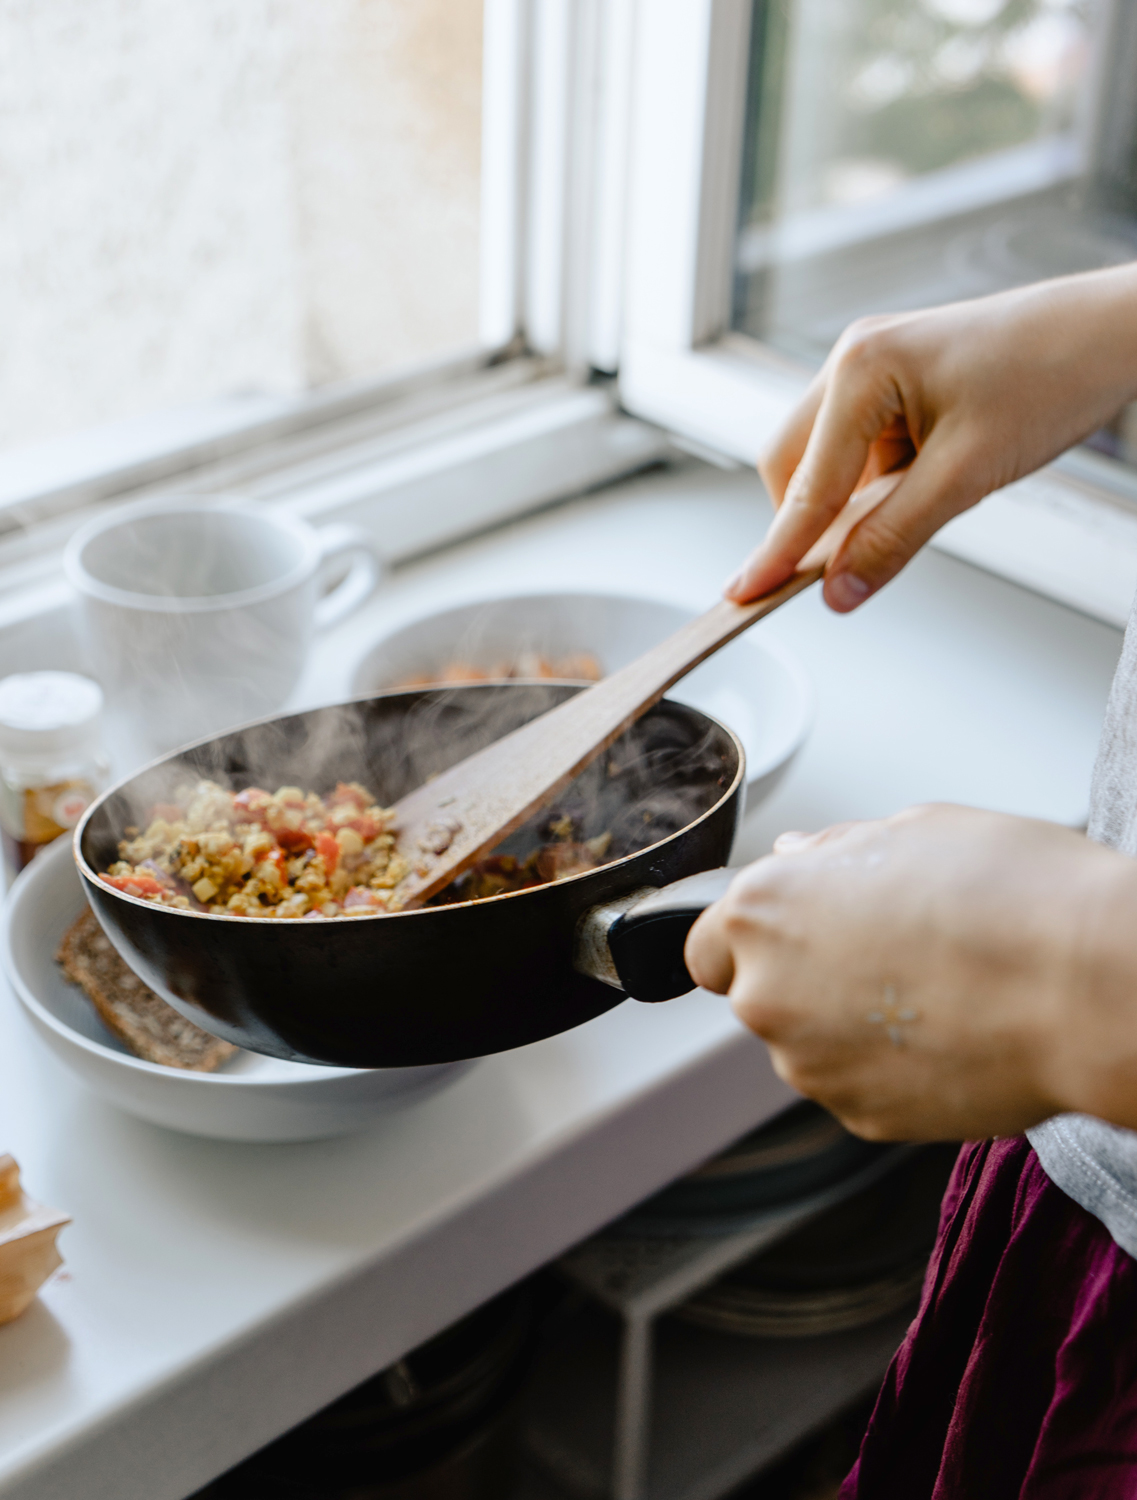 person plating breakfast from a skillet